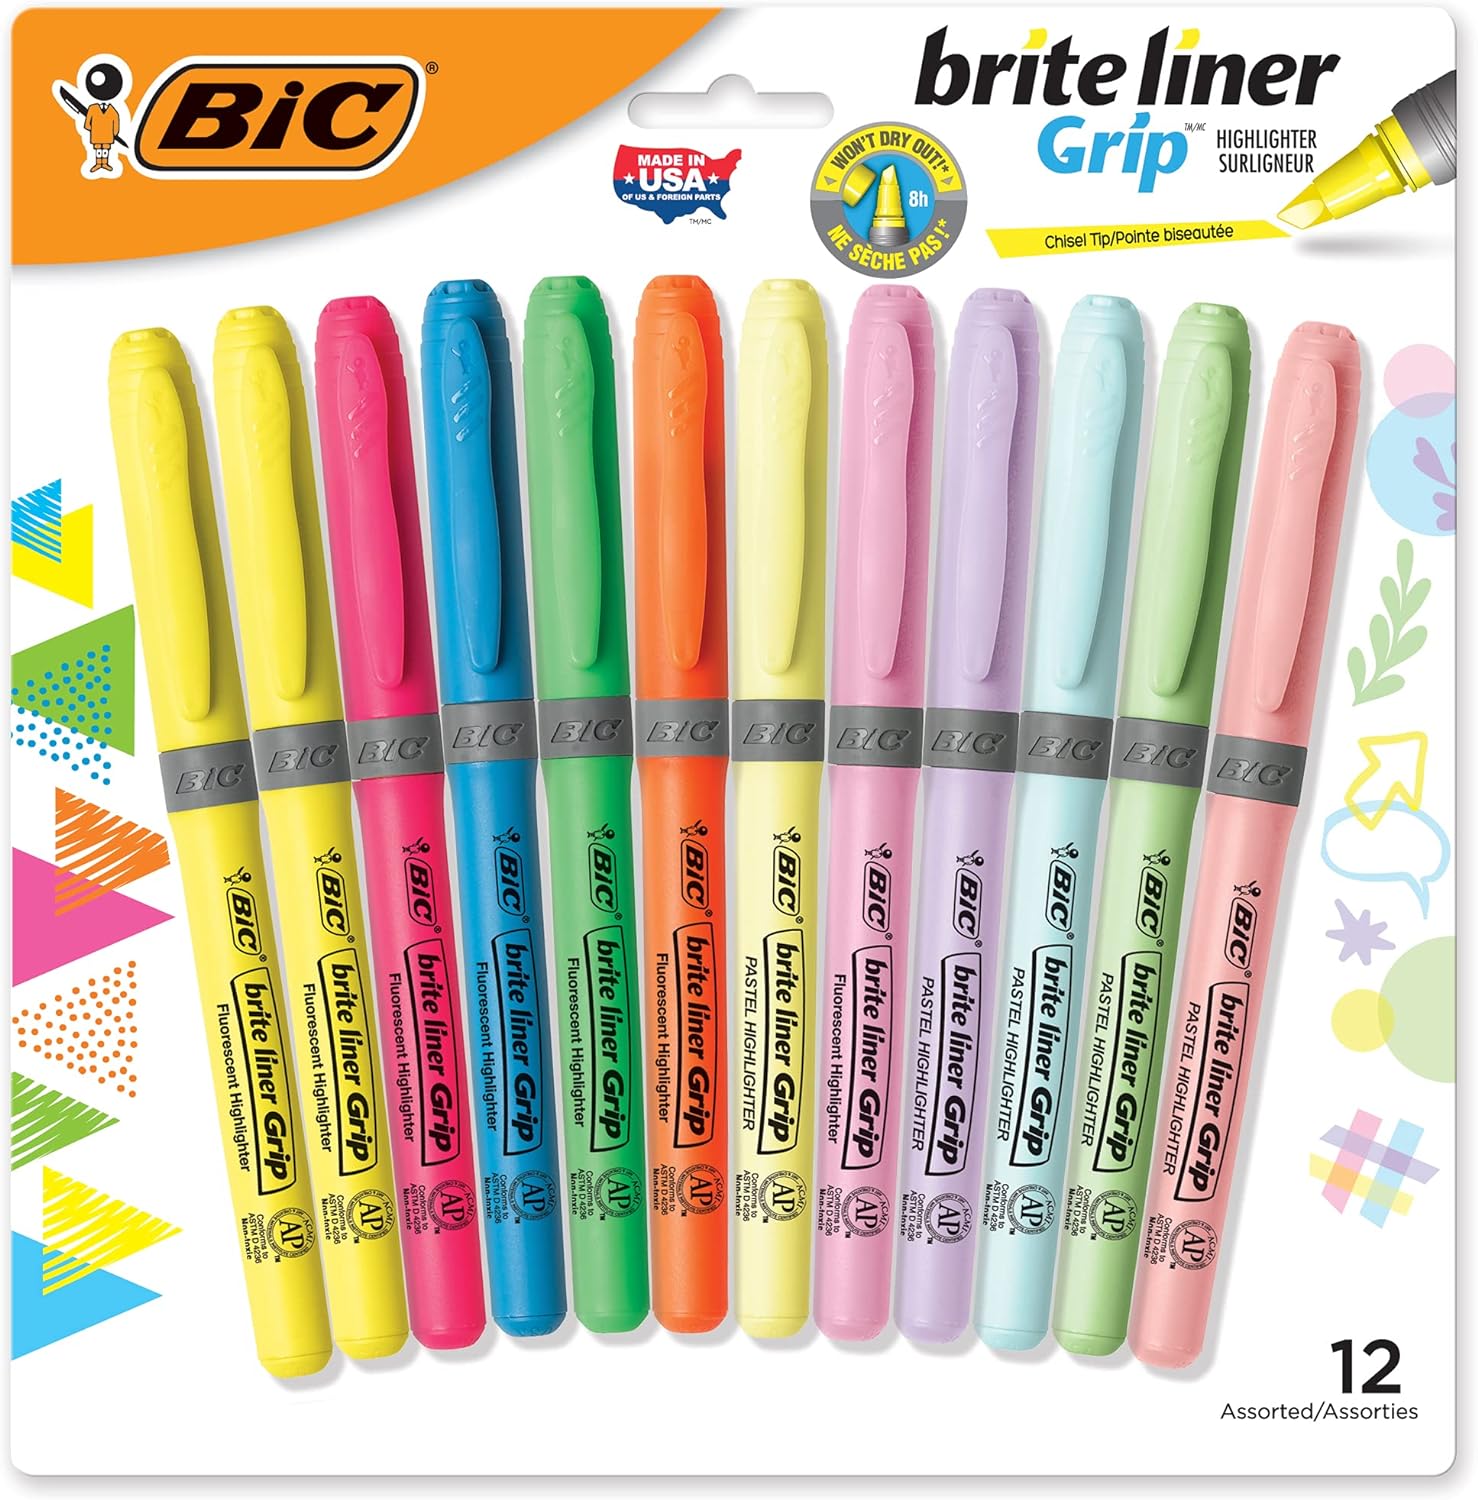 I read and journal a lotand being ol' school, I do a lot of underlining and highlighting For me, the best and affordable Inkpen is the PILOT G-2 05 and paring that pen with this package of BIC Brite Liner Pastel & Florescent highlighters is a great deal (forgive my unsolicited PILOT Review)They are pretty and will compliment any EasterArts & Craft project  needing color. Great for highlighting my Bible passages  The Pastels don't bleed through.